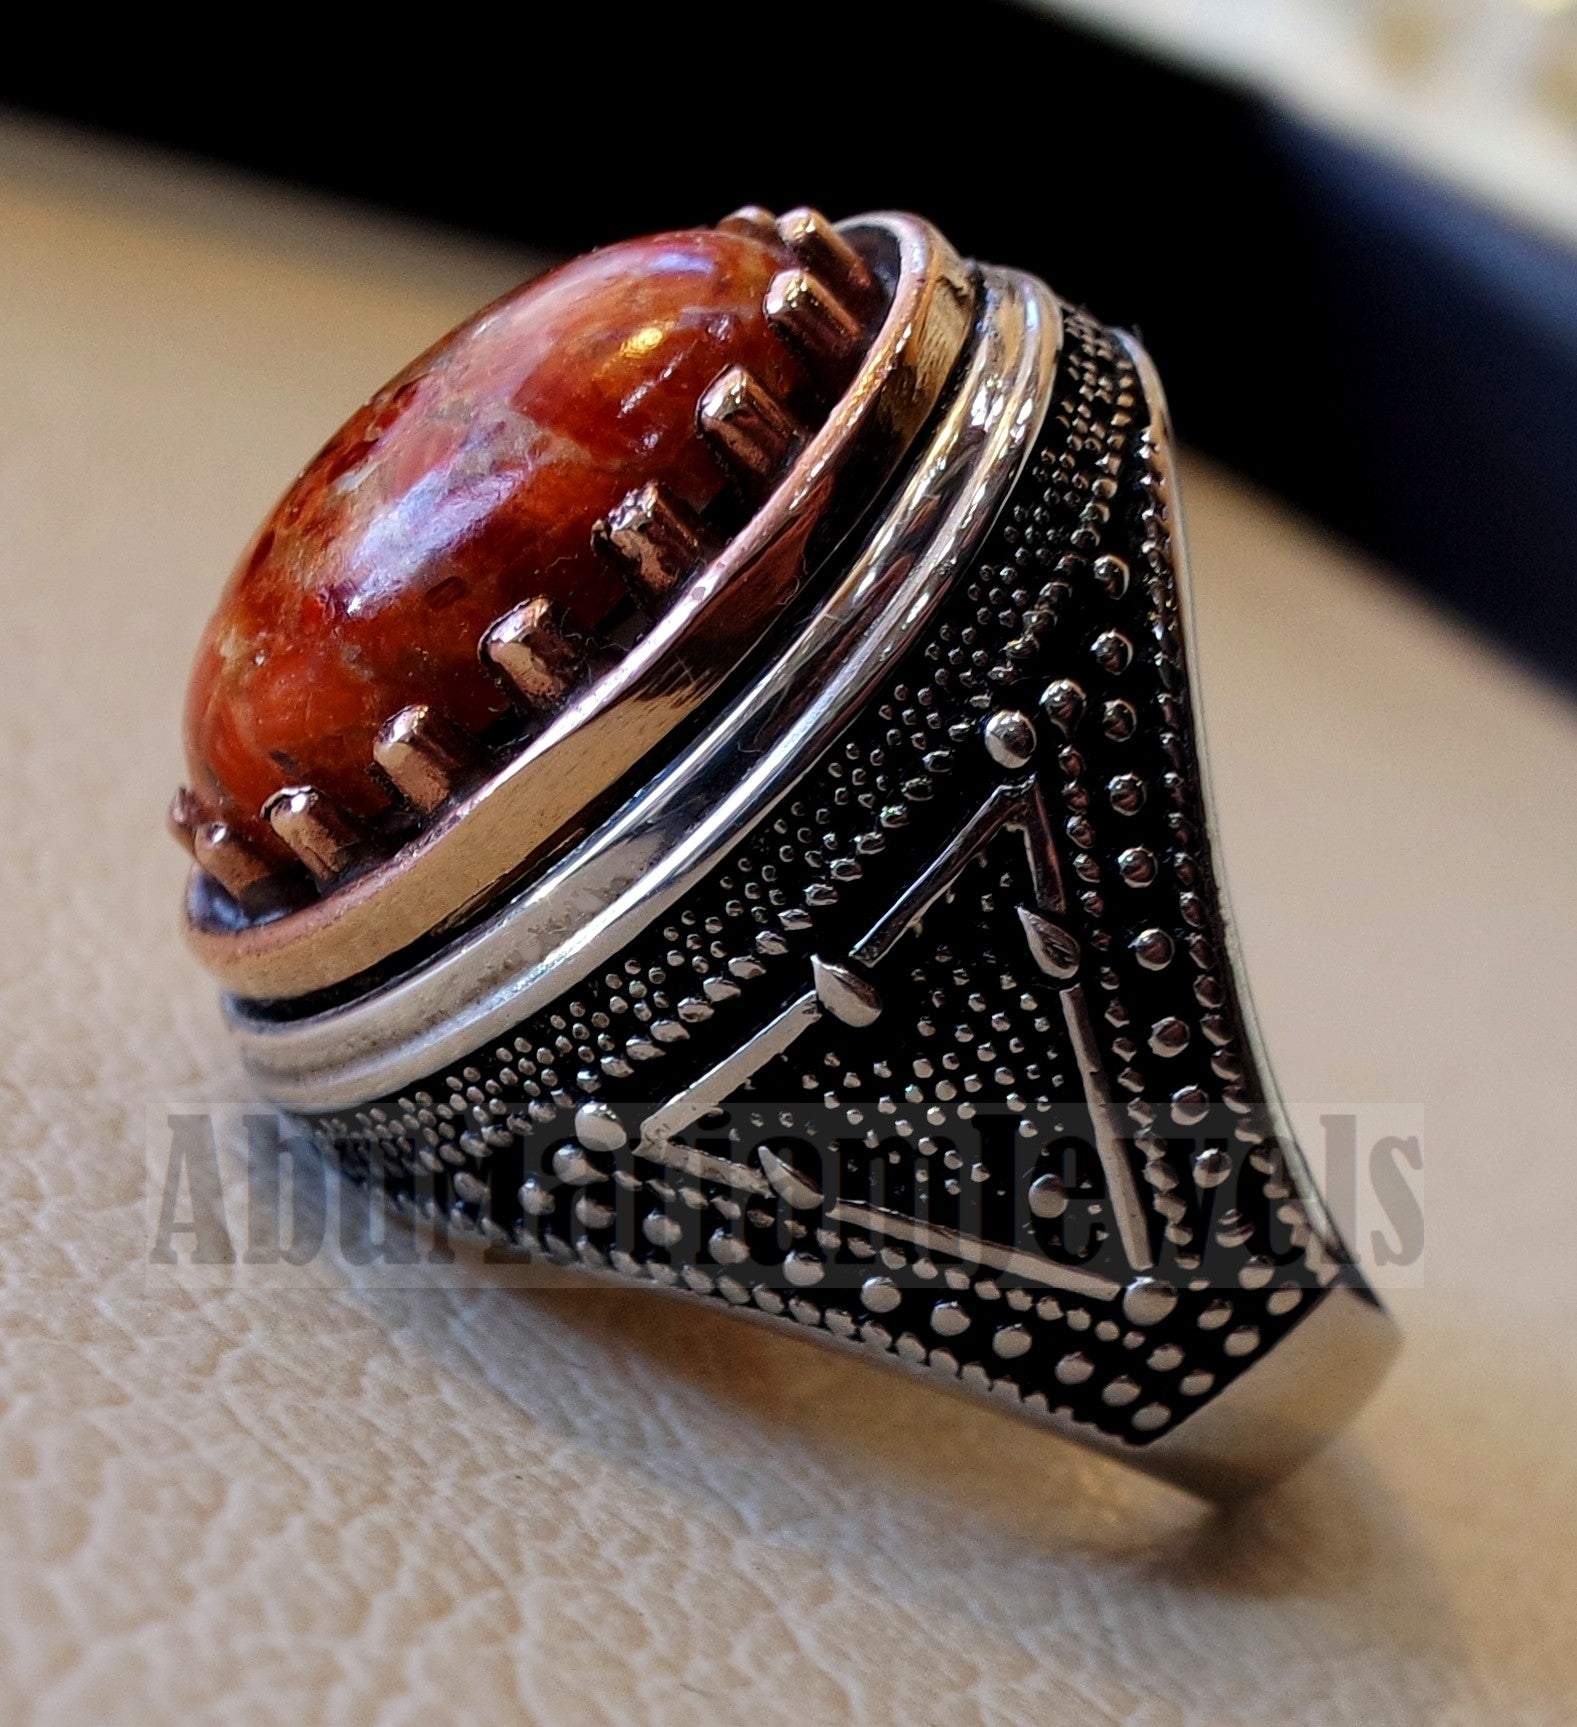 Sponge coral Murjan heavy men ring orange to red natural stone sterling silver and bronze 925 ottoman style all sizes fast shipping مرجان